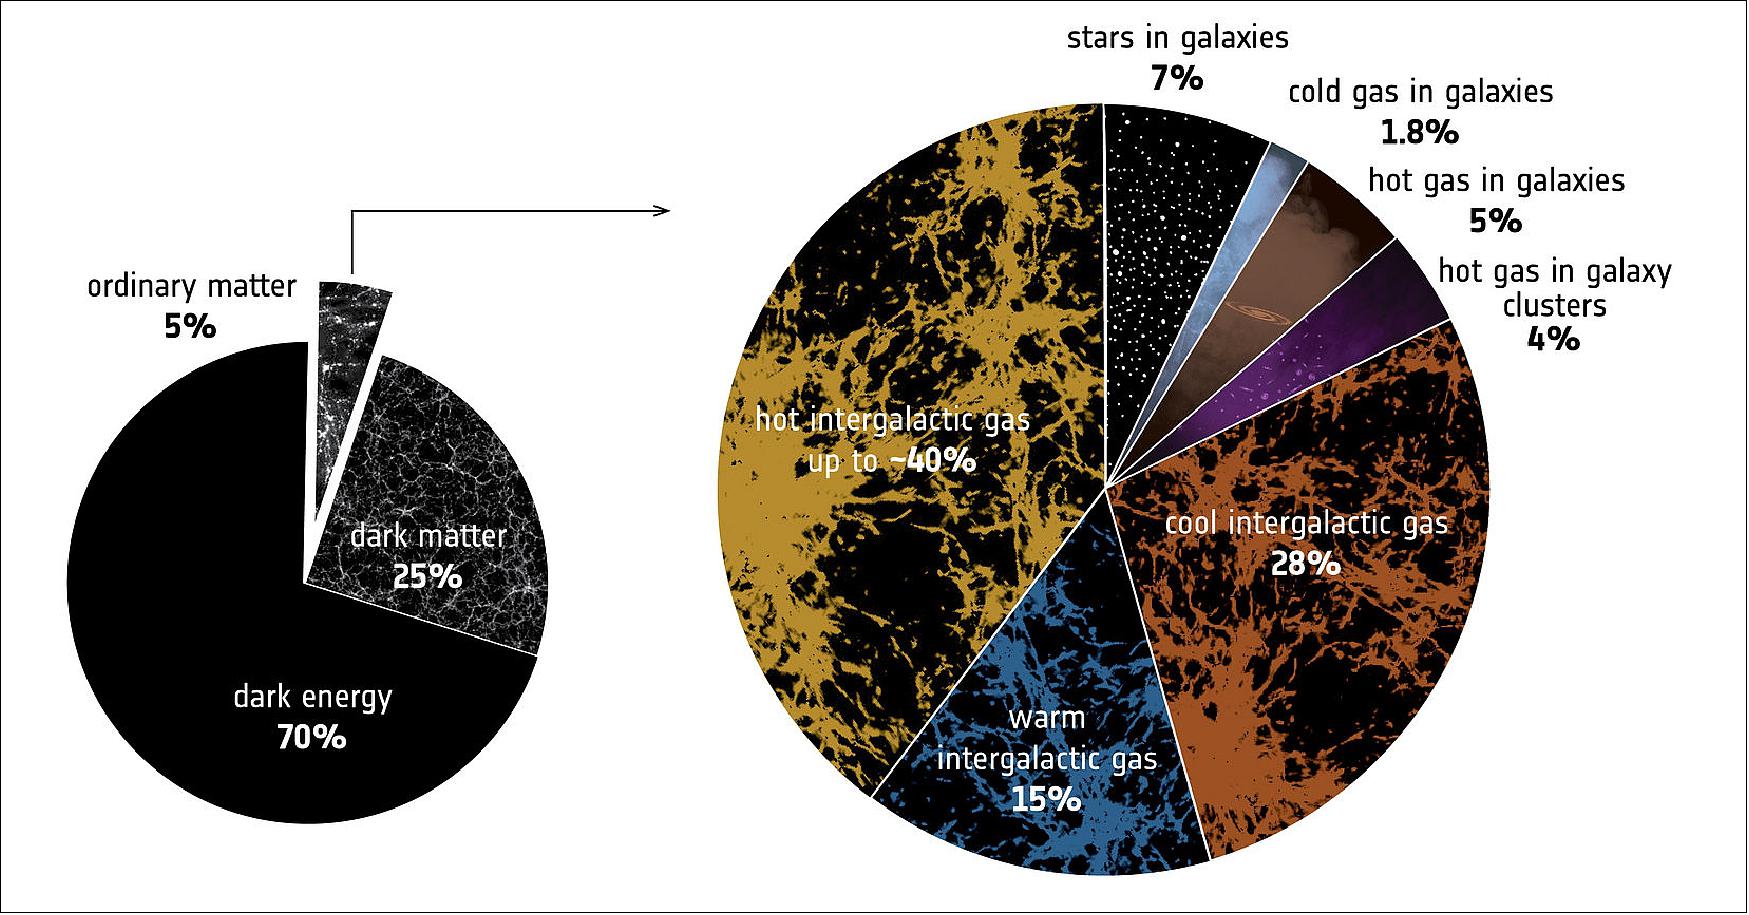 Figure 46: The cosmic budget of ‘ordinary’ matter. While the mysterious dark matter and dark energy make up about 25 and 70 percent of our cosmos respectively, the ordinary matter that makes up everything we see – from stars and galaxies to planets and people – amounts to only about five percent. — However, stars in galaxies across the Universe only make up about seven percent of all ordinary matter. The cold interstellar gas that permeates galaxies – the raw material to create stars – amounts to about 1.8 percent of total, while the hot, diffuse gas in the haloes that encompass galaxies makes up roughly five percent, and the even hotter gas that fills galaxy clusters – the largest cosmic structures held together by gravity – accounts for four percent. — This is not surprising: stars, galaxies and galaxy clusters form in the densest knots of the cosmic web, the filamentary distribution of both dark and ordinary matter that extends throughout the Universe. While these sites are dense, they are also rare, so not the best spots to look for the majority of cosmic matter. — Most of the Universe’s ordinary matter, or baryons, must be lurking in the ubiquitous filaments of this cosmic web, where matter is however less dense and therefore more challenging to observe. Using different techniques over the years, they were able to locate a good chunk of this intergalactic material – mainly its cool component (also known as Lyman-alpha forest, which makes up about 28 percent of all baryons) and its warm component (about 15 percent). — After two decades of observations, astronomers using ESA’s XMM-Newton space observatory have detected the hot component of this intergalactic material along the line of sight to a distant quasar. The amount of hot intergalactic gas detected in these observations amounts up to 40 percent of all baryons in the Universe, closing the gap in the overall budget of ordinary matter in the cosmos (image credit: ESA)